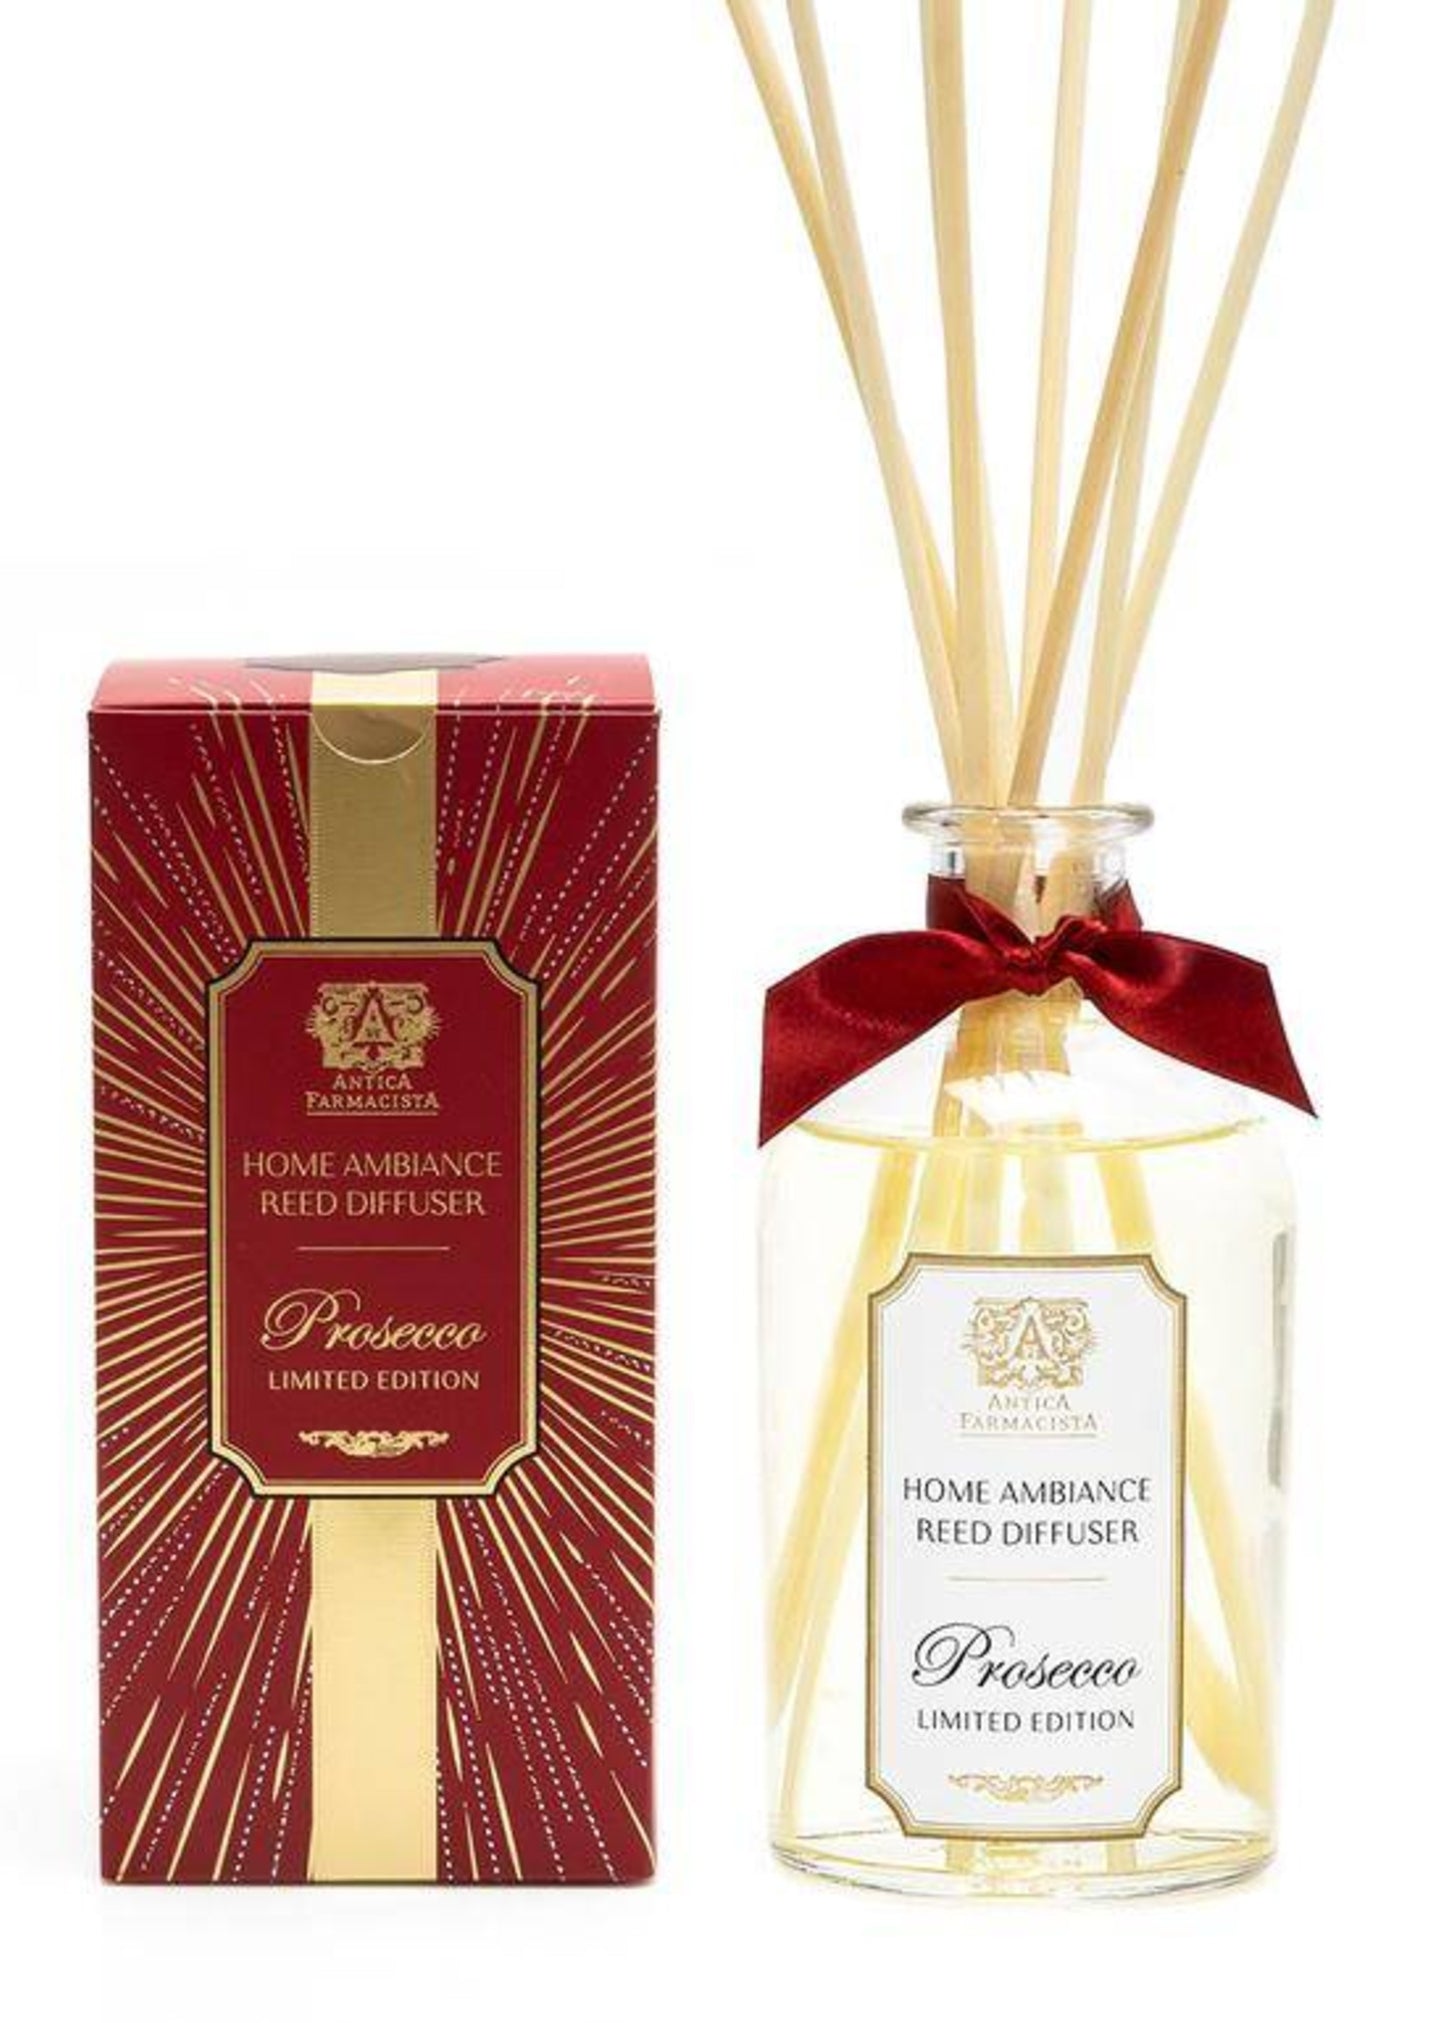 Home Ambiance Reed Diffuser Prosecco Limited Edition